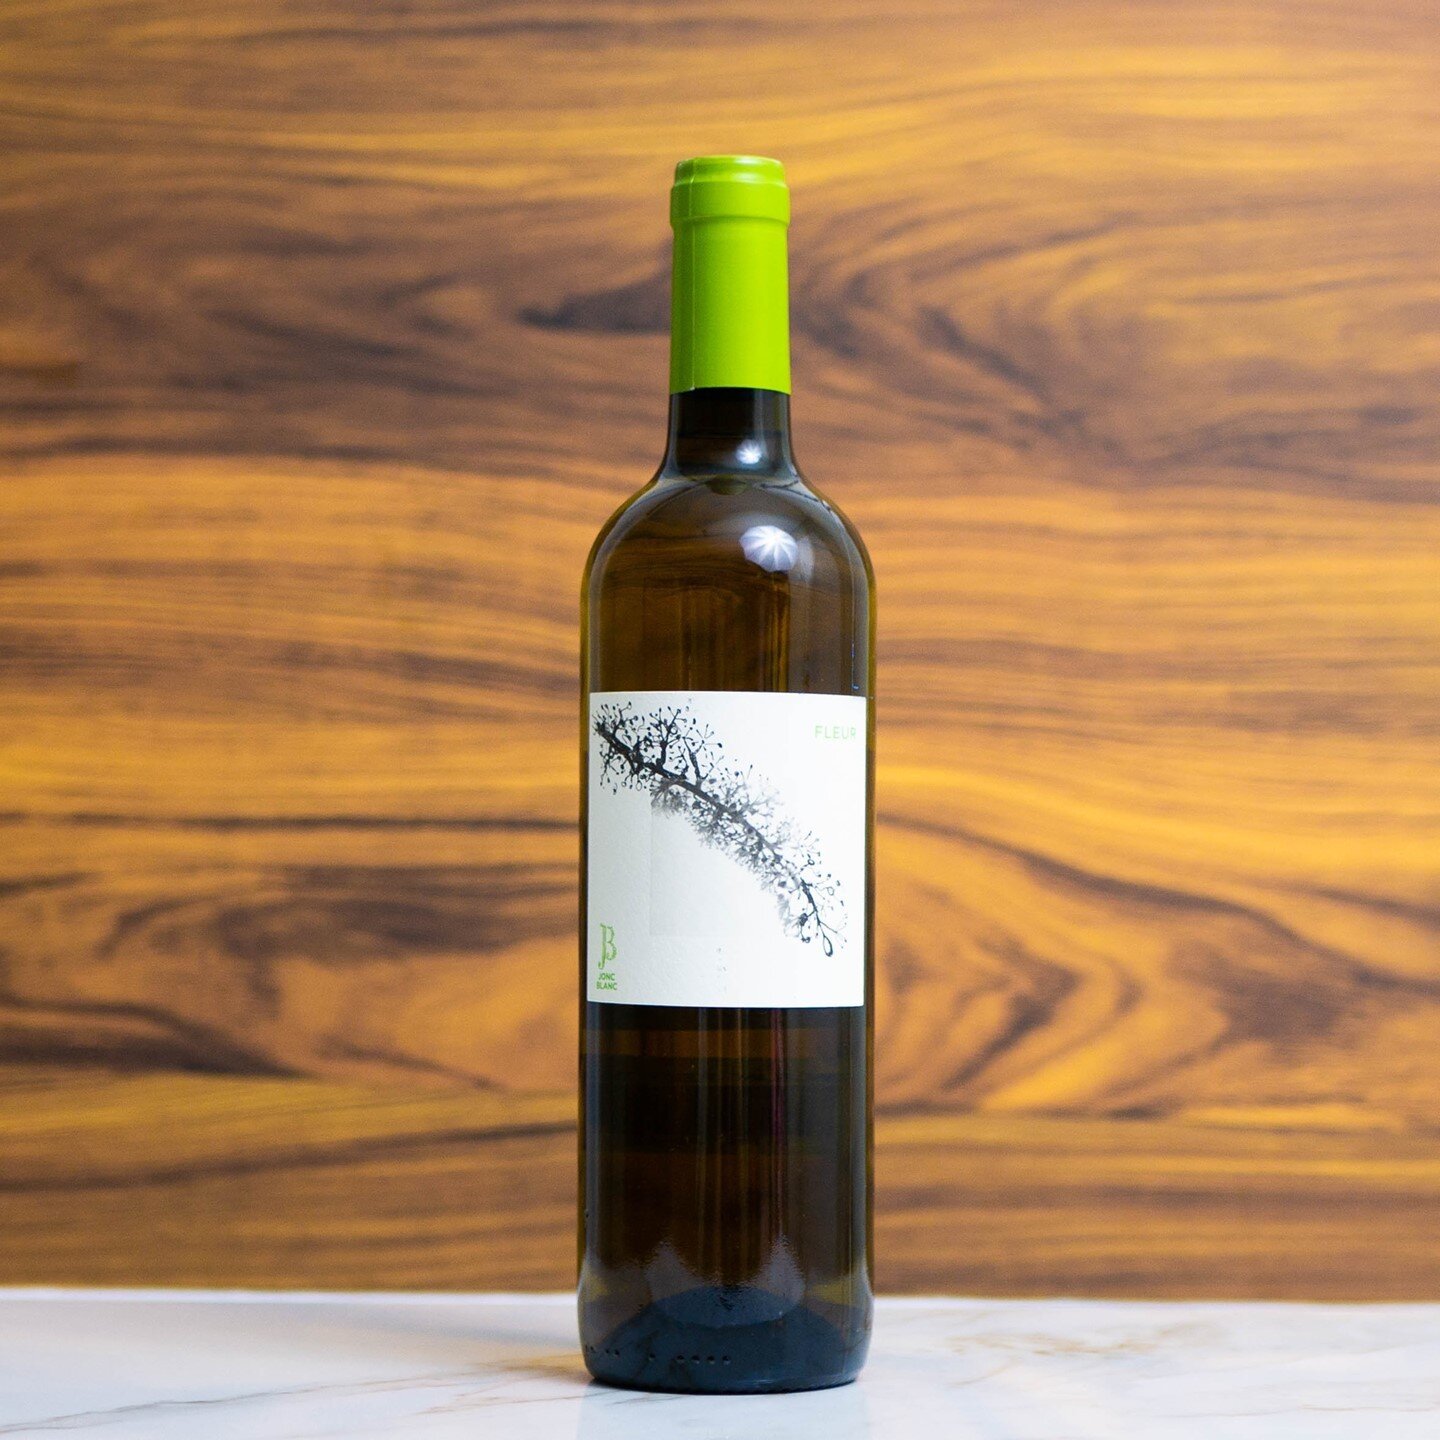 If you haven't had this wine either pick up this bottle or come and get a glass!⁠
⁠
The Jonc Blanc Fleur (Sauvignon Blanc, Sauvignon Gris and S&eacute;millon) this blend is so tasty. Bright and Juicy with a good amount of acidity so it goes well with